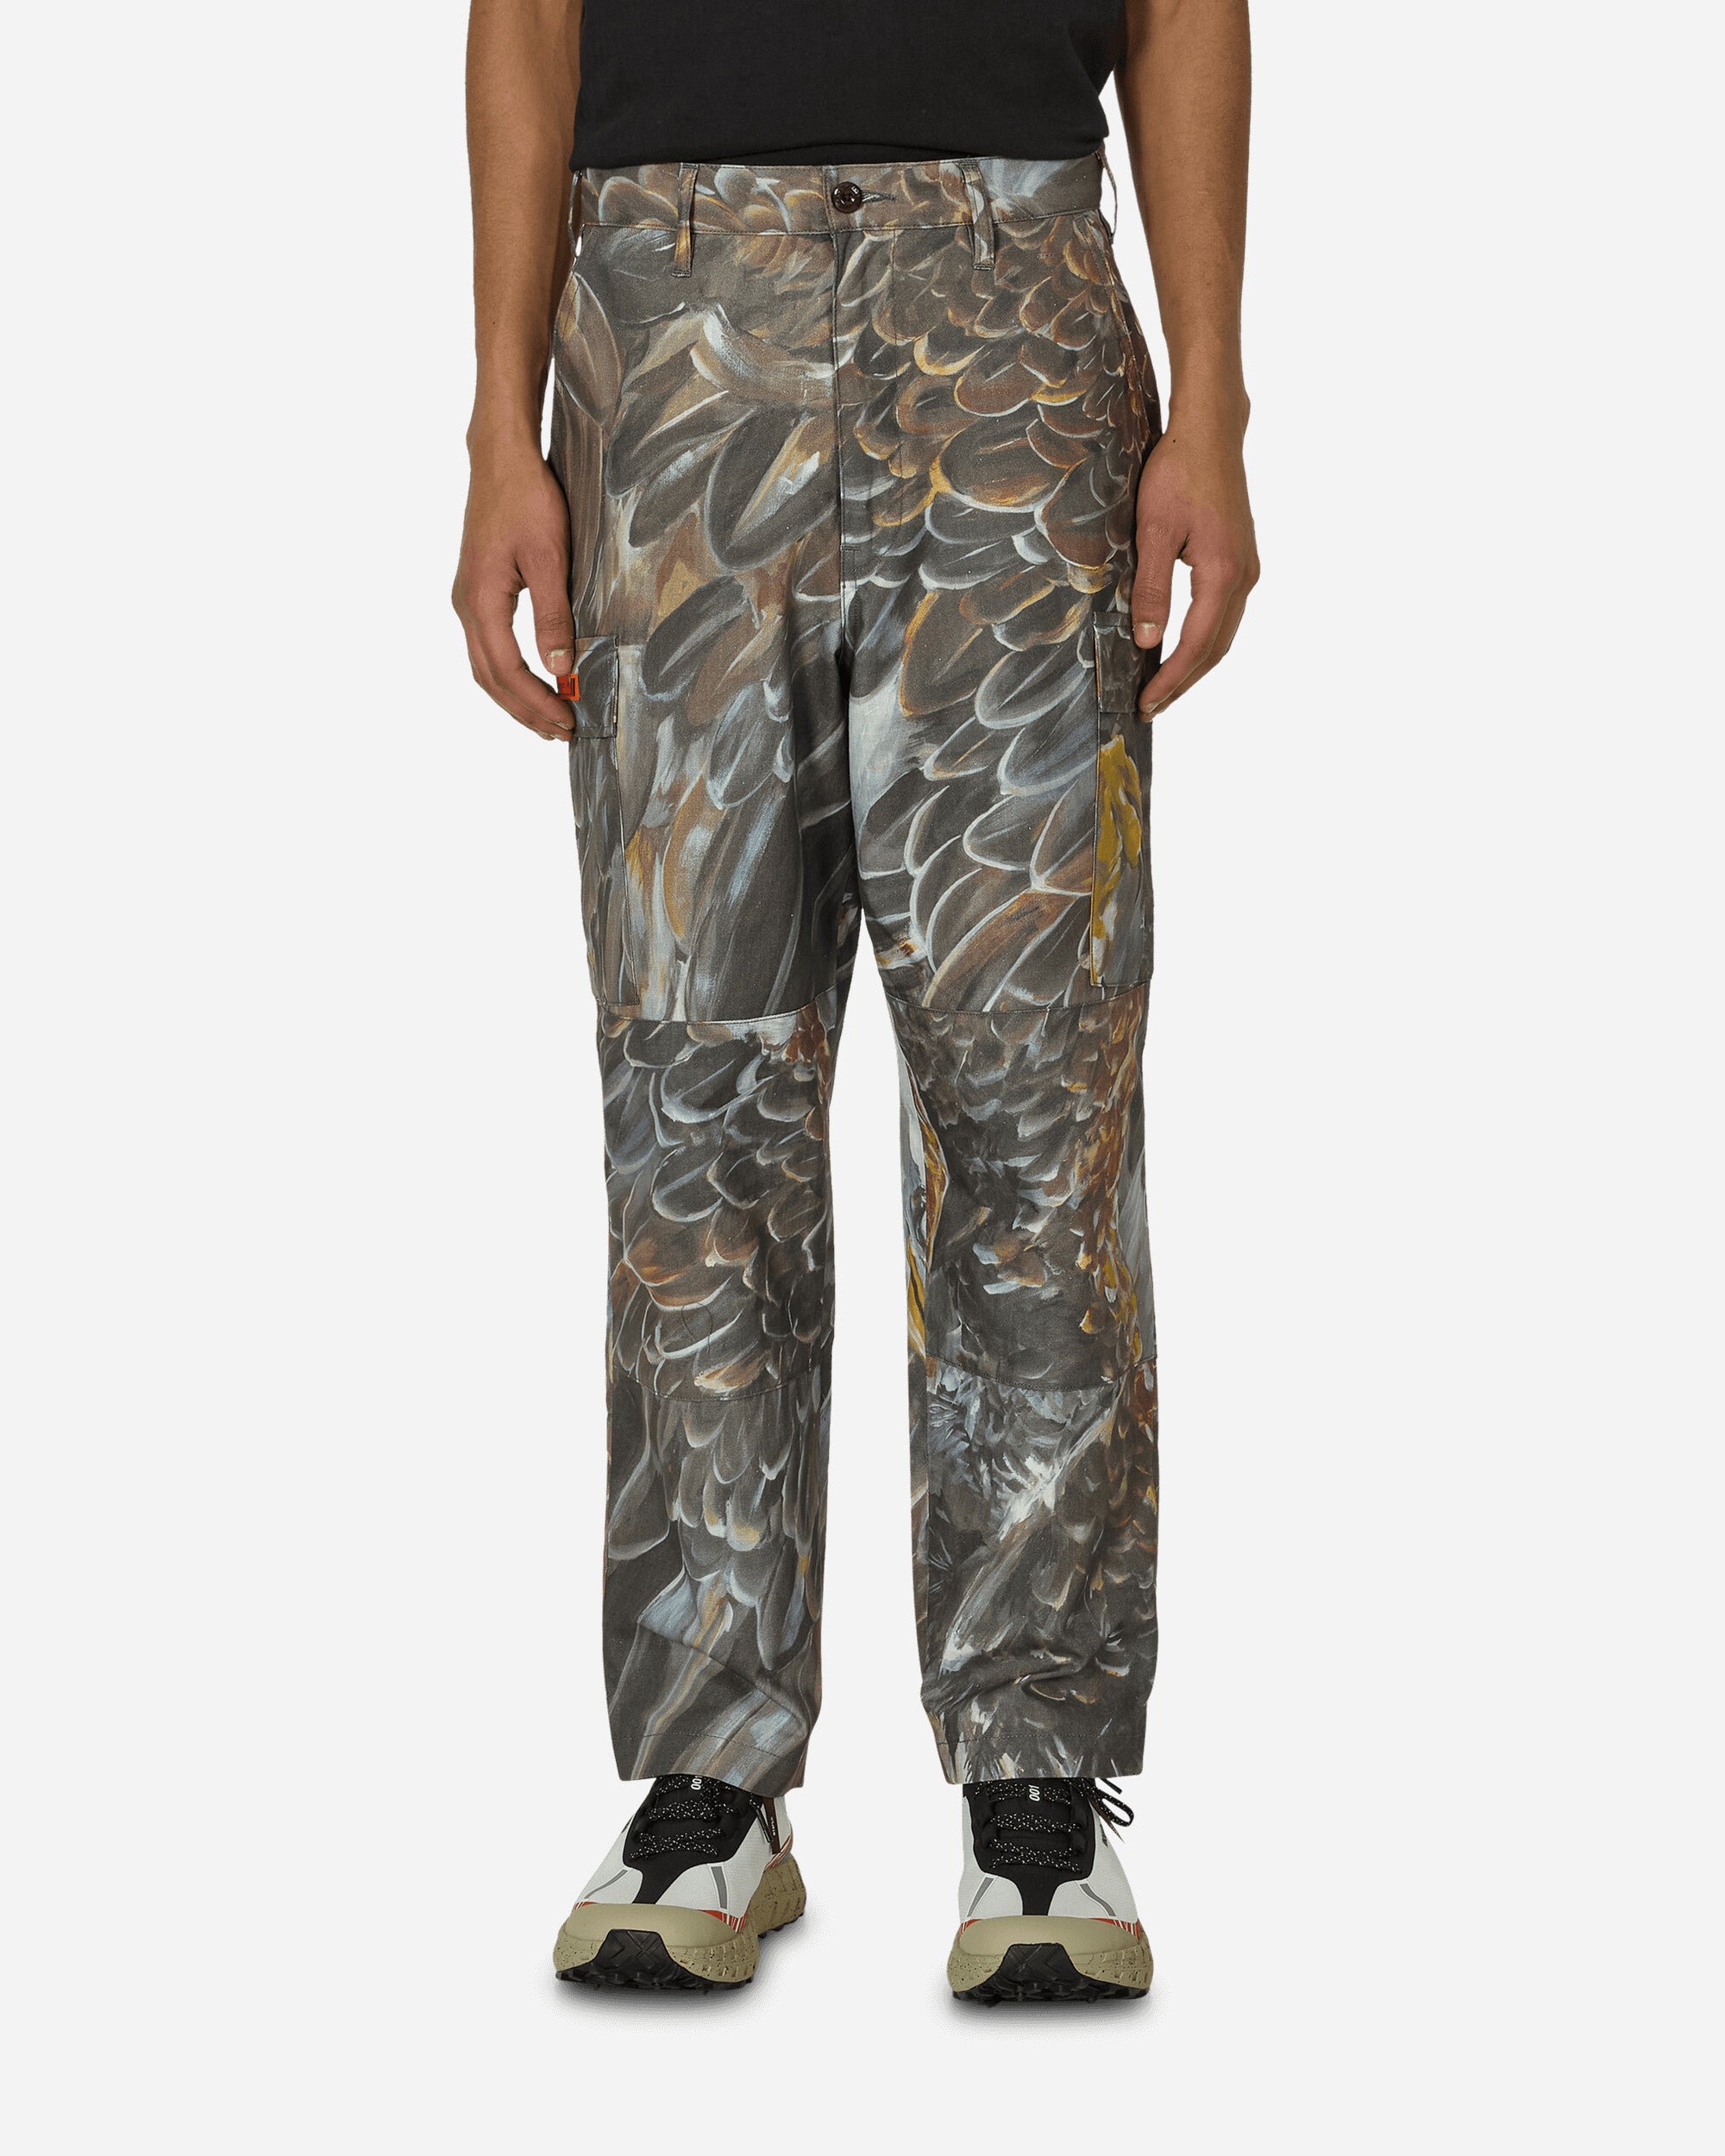 MILT9602 Trousers Wed Camo